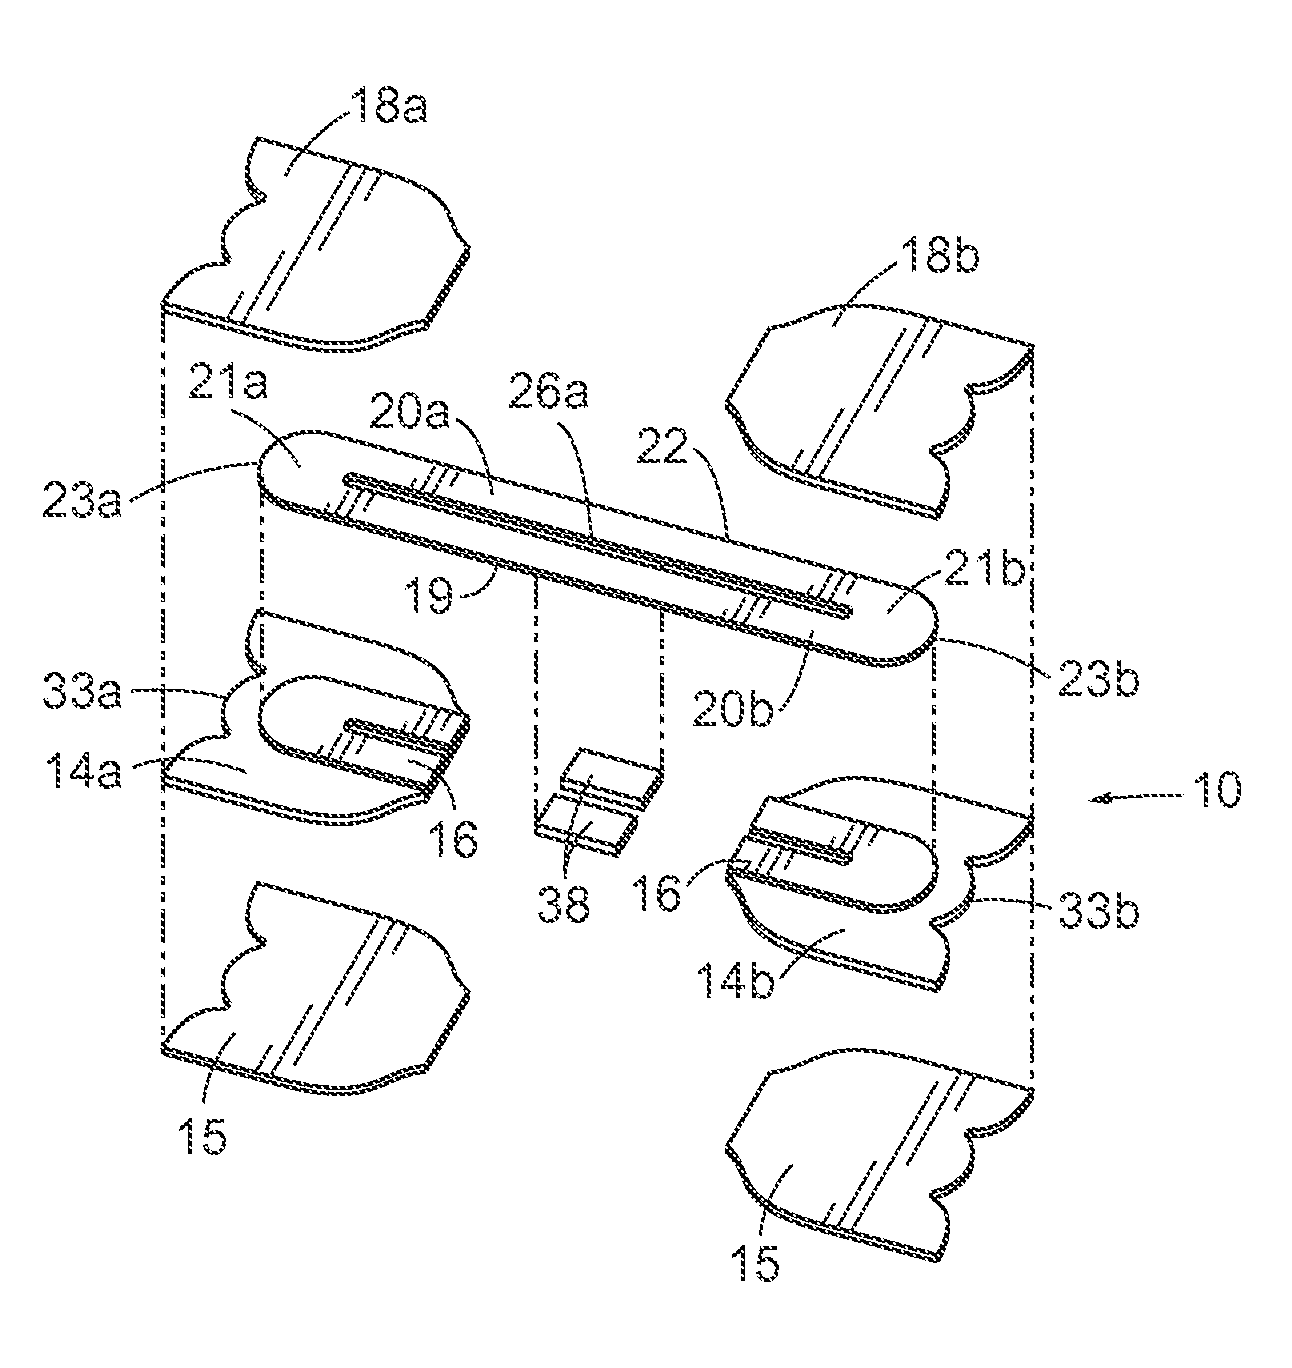 Economical Nasal Dilator and Method of Manufacture